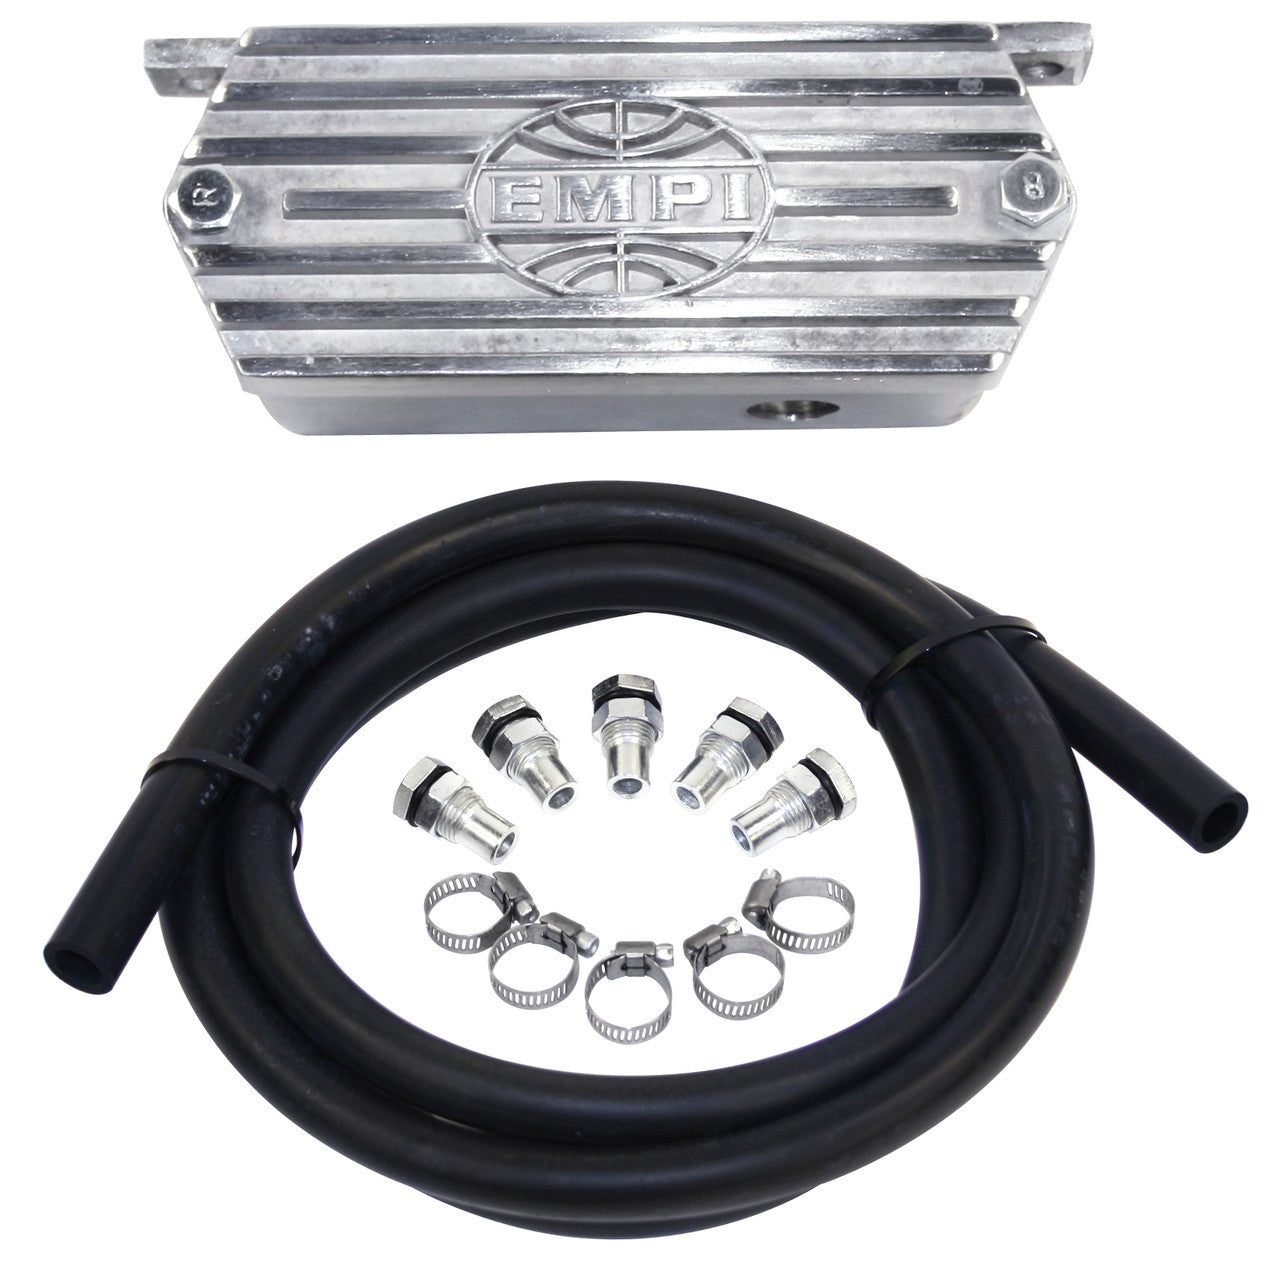 Empi 8544 Engine Oil Breather Box Kit For Vw Air-cooled Engine